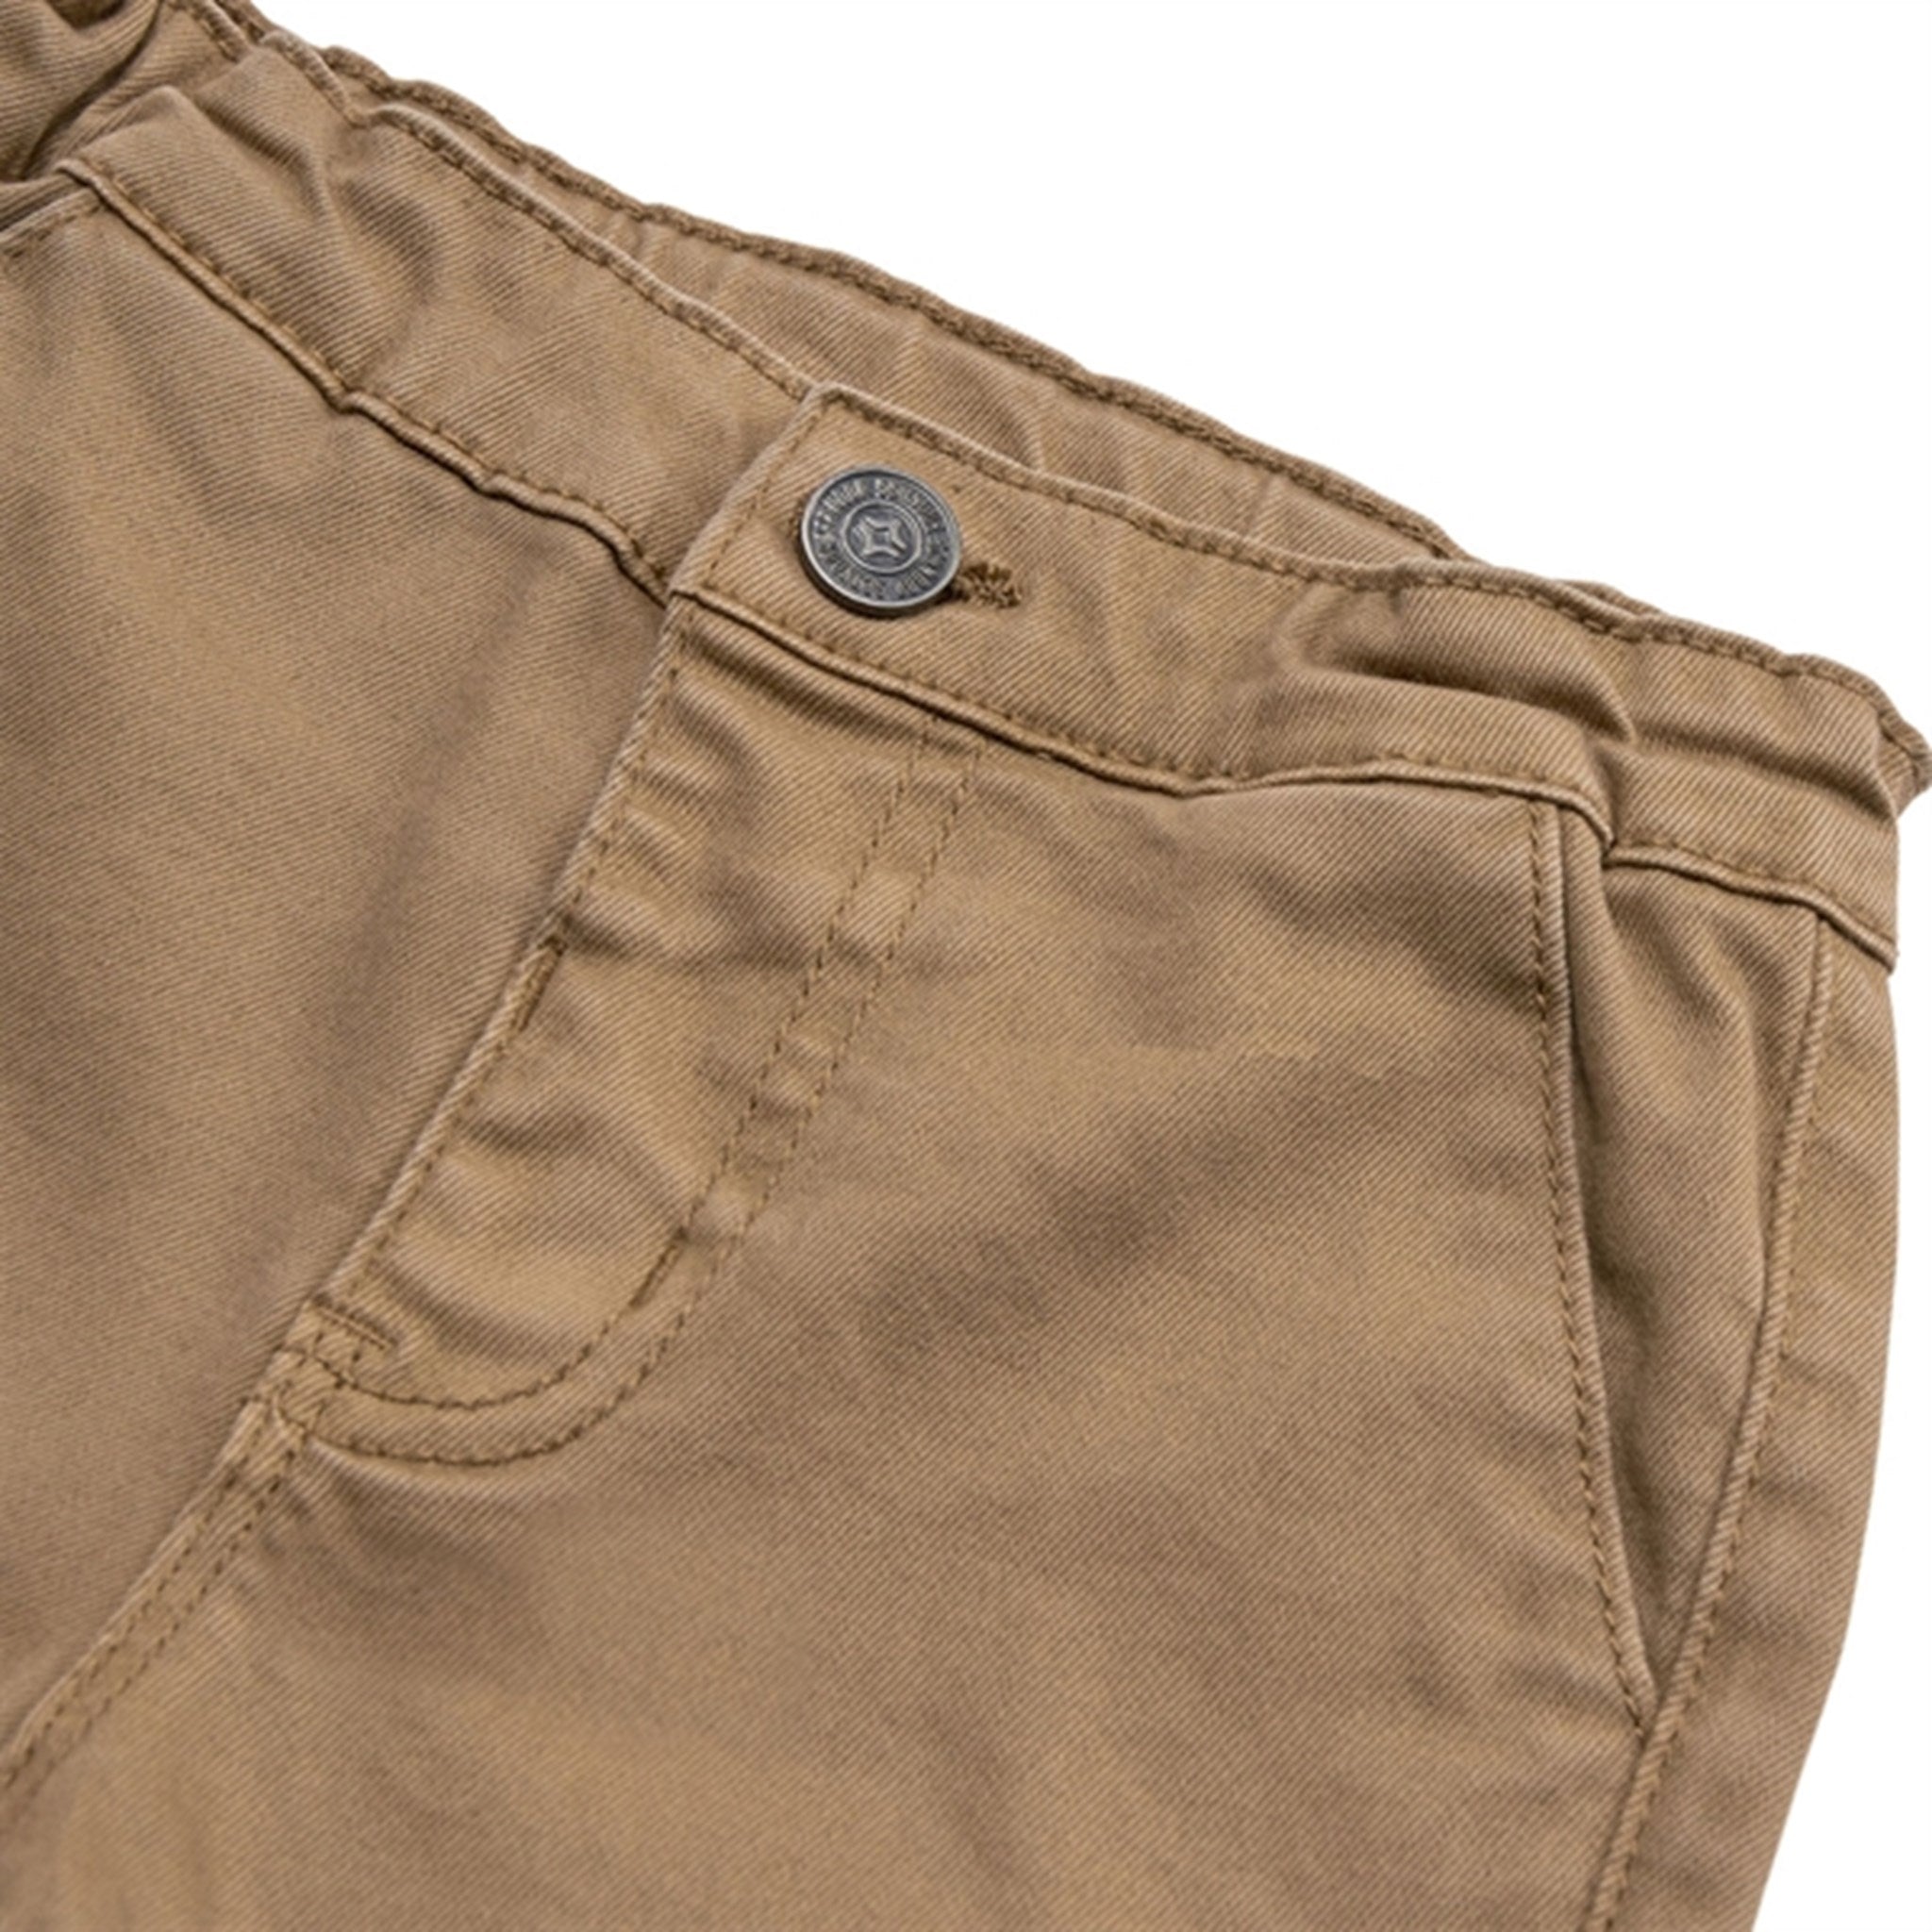 Petit by Sofie Schnoor Camel Shorts 2